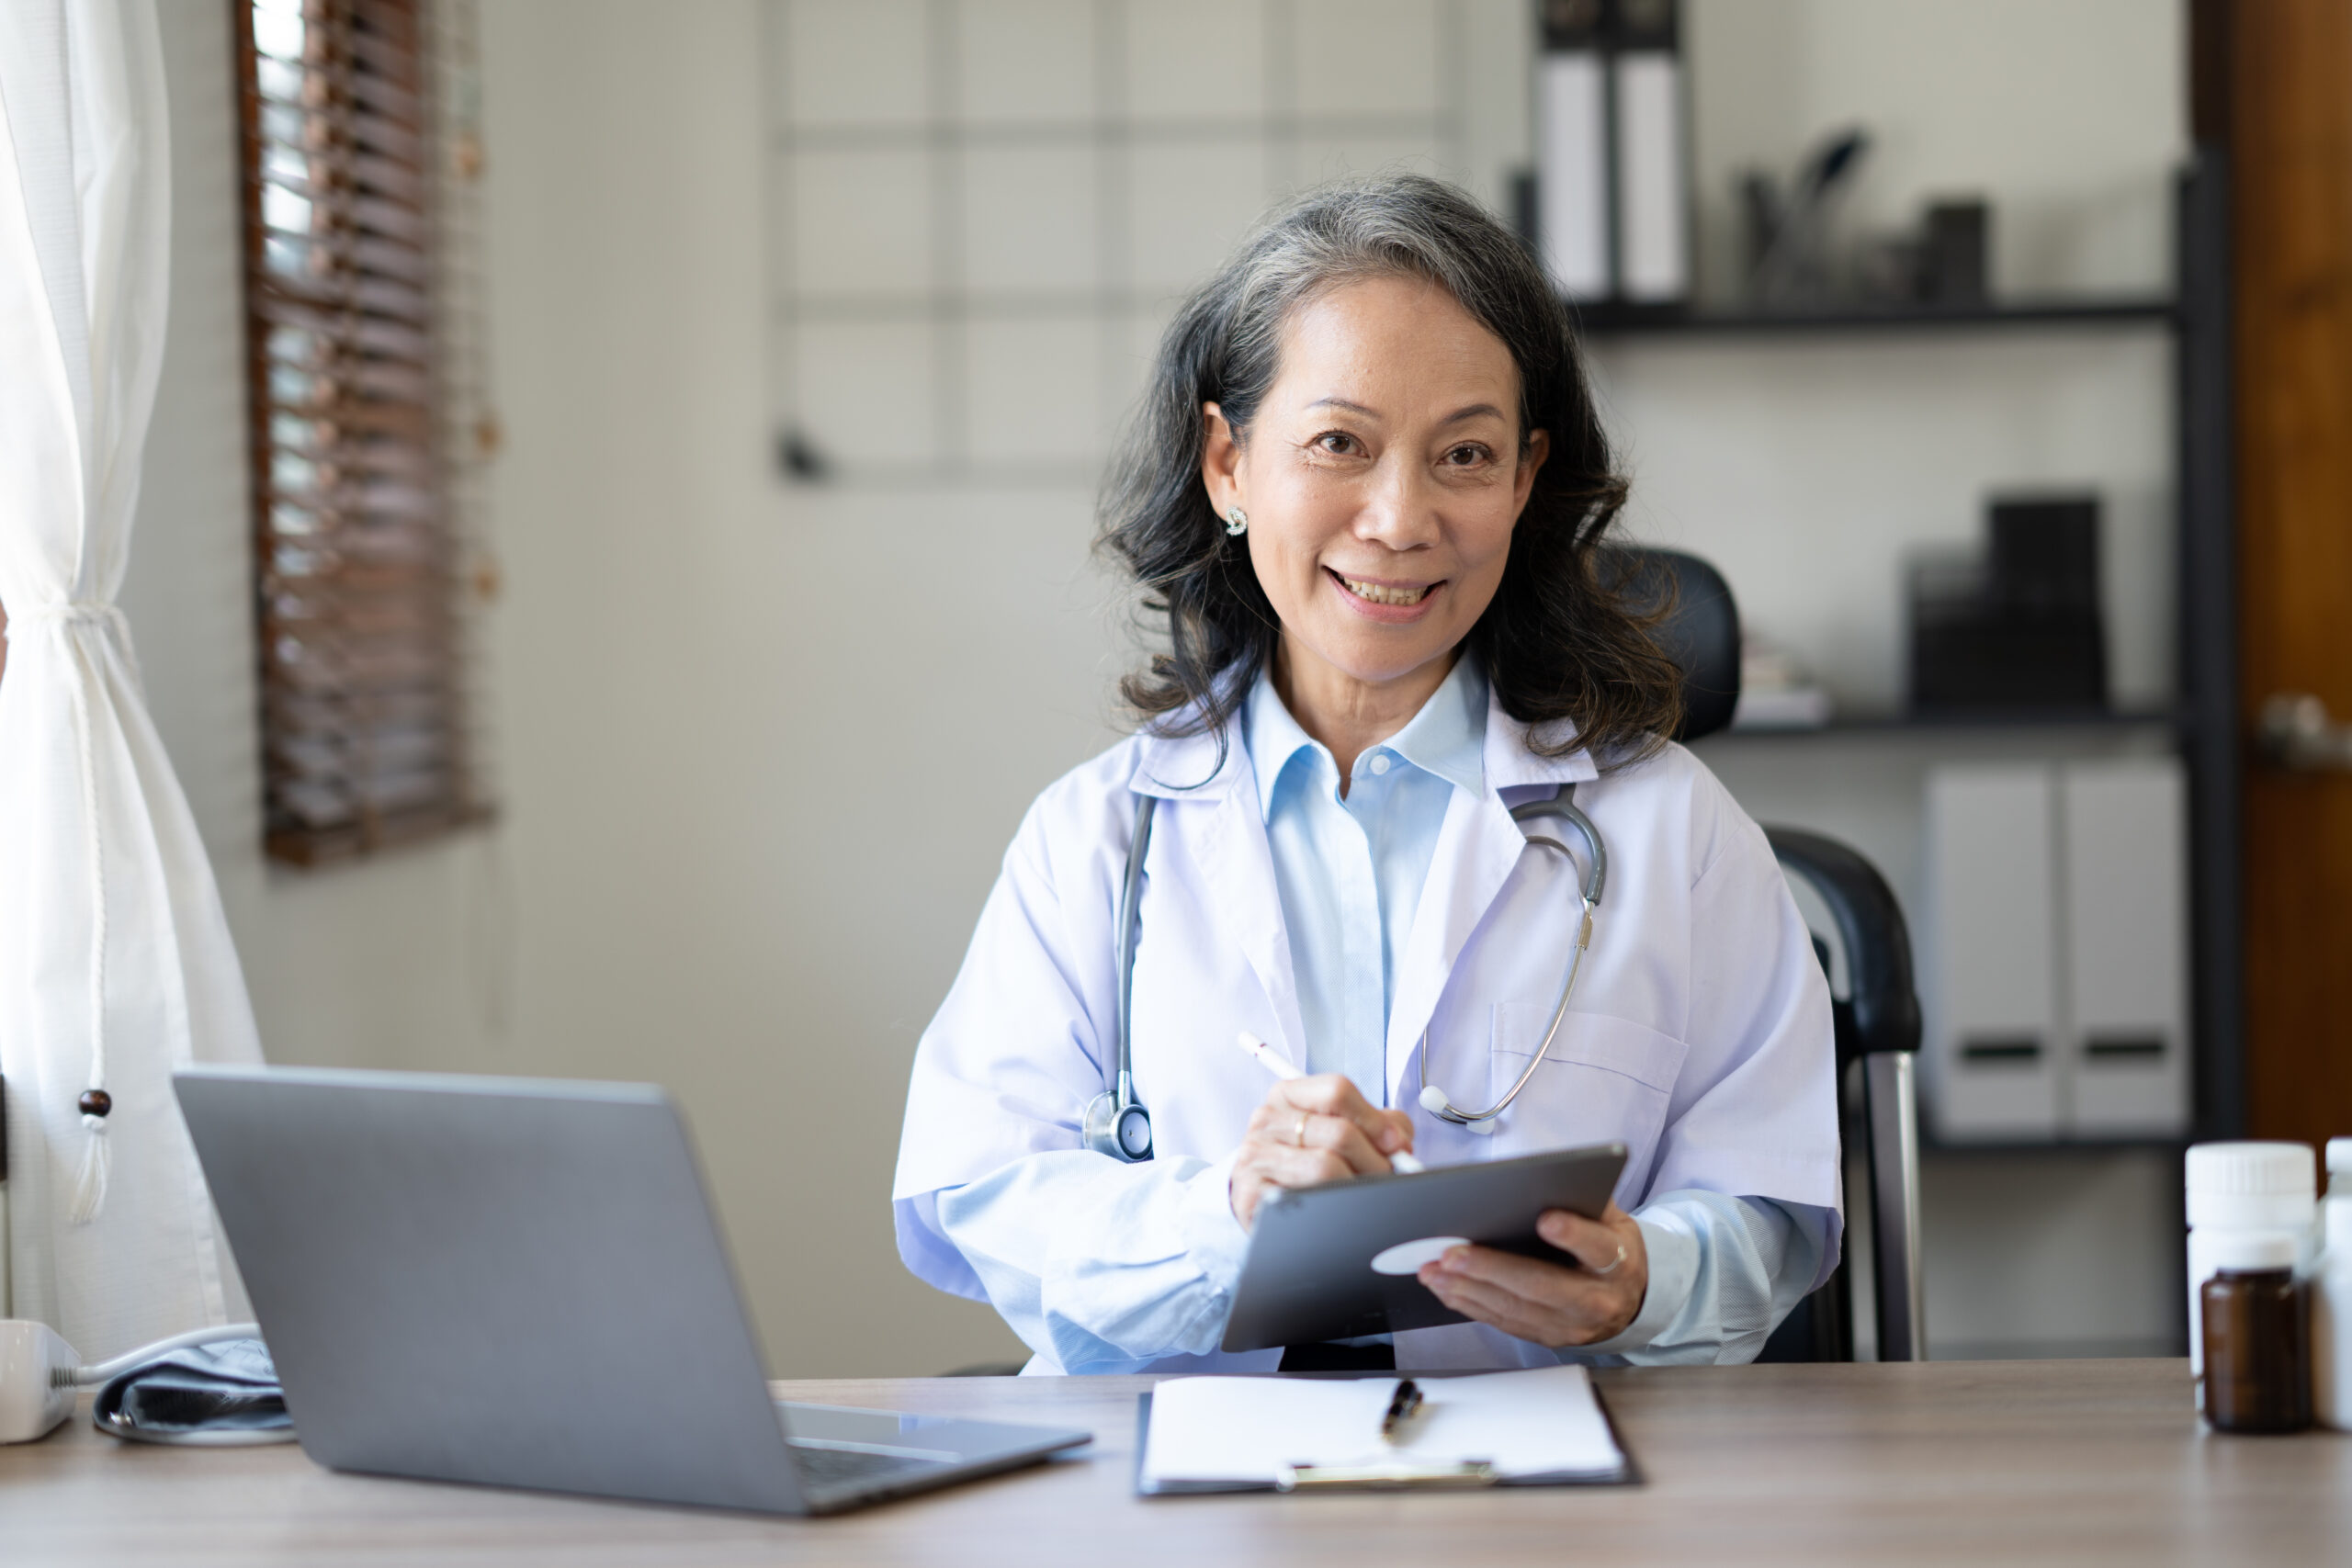 Female doctor using EHR Software in Healthcare clinic